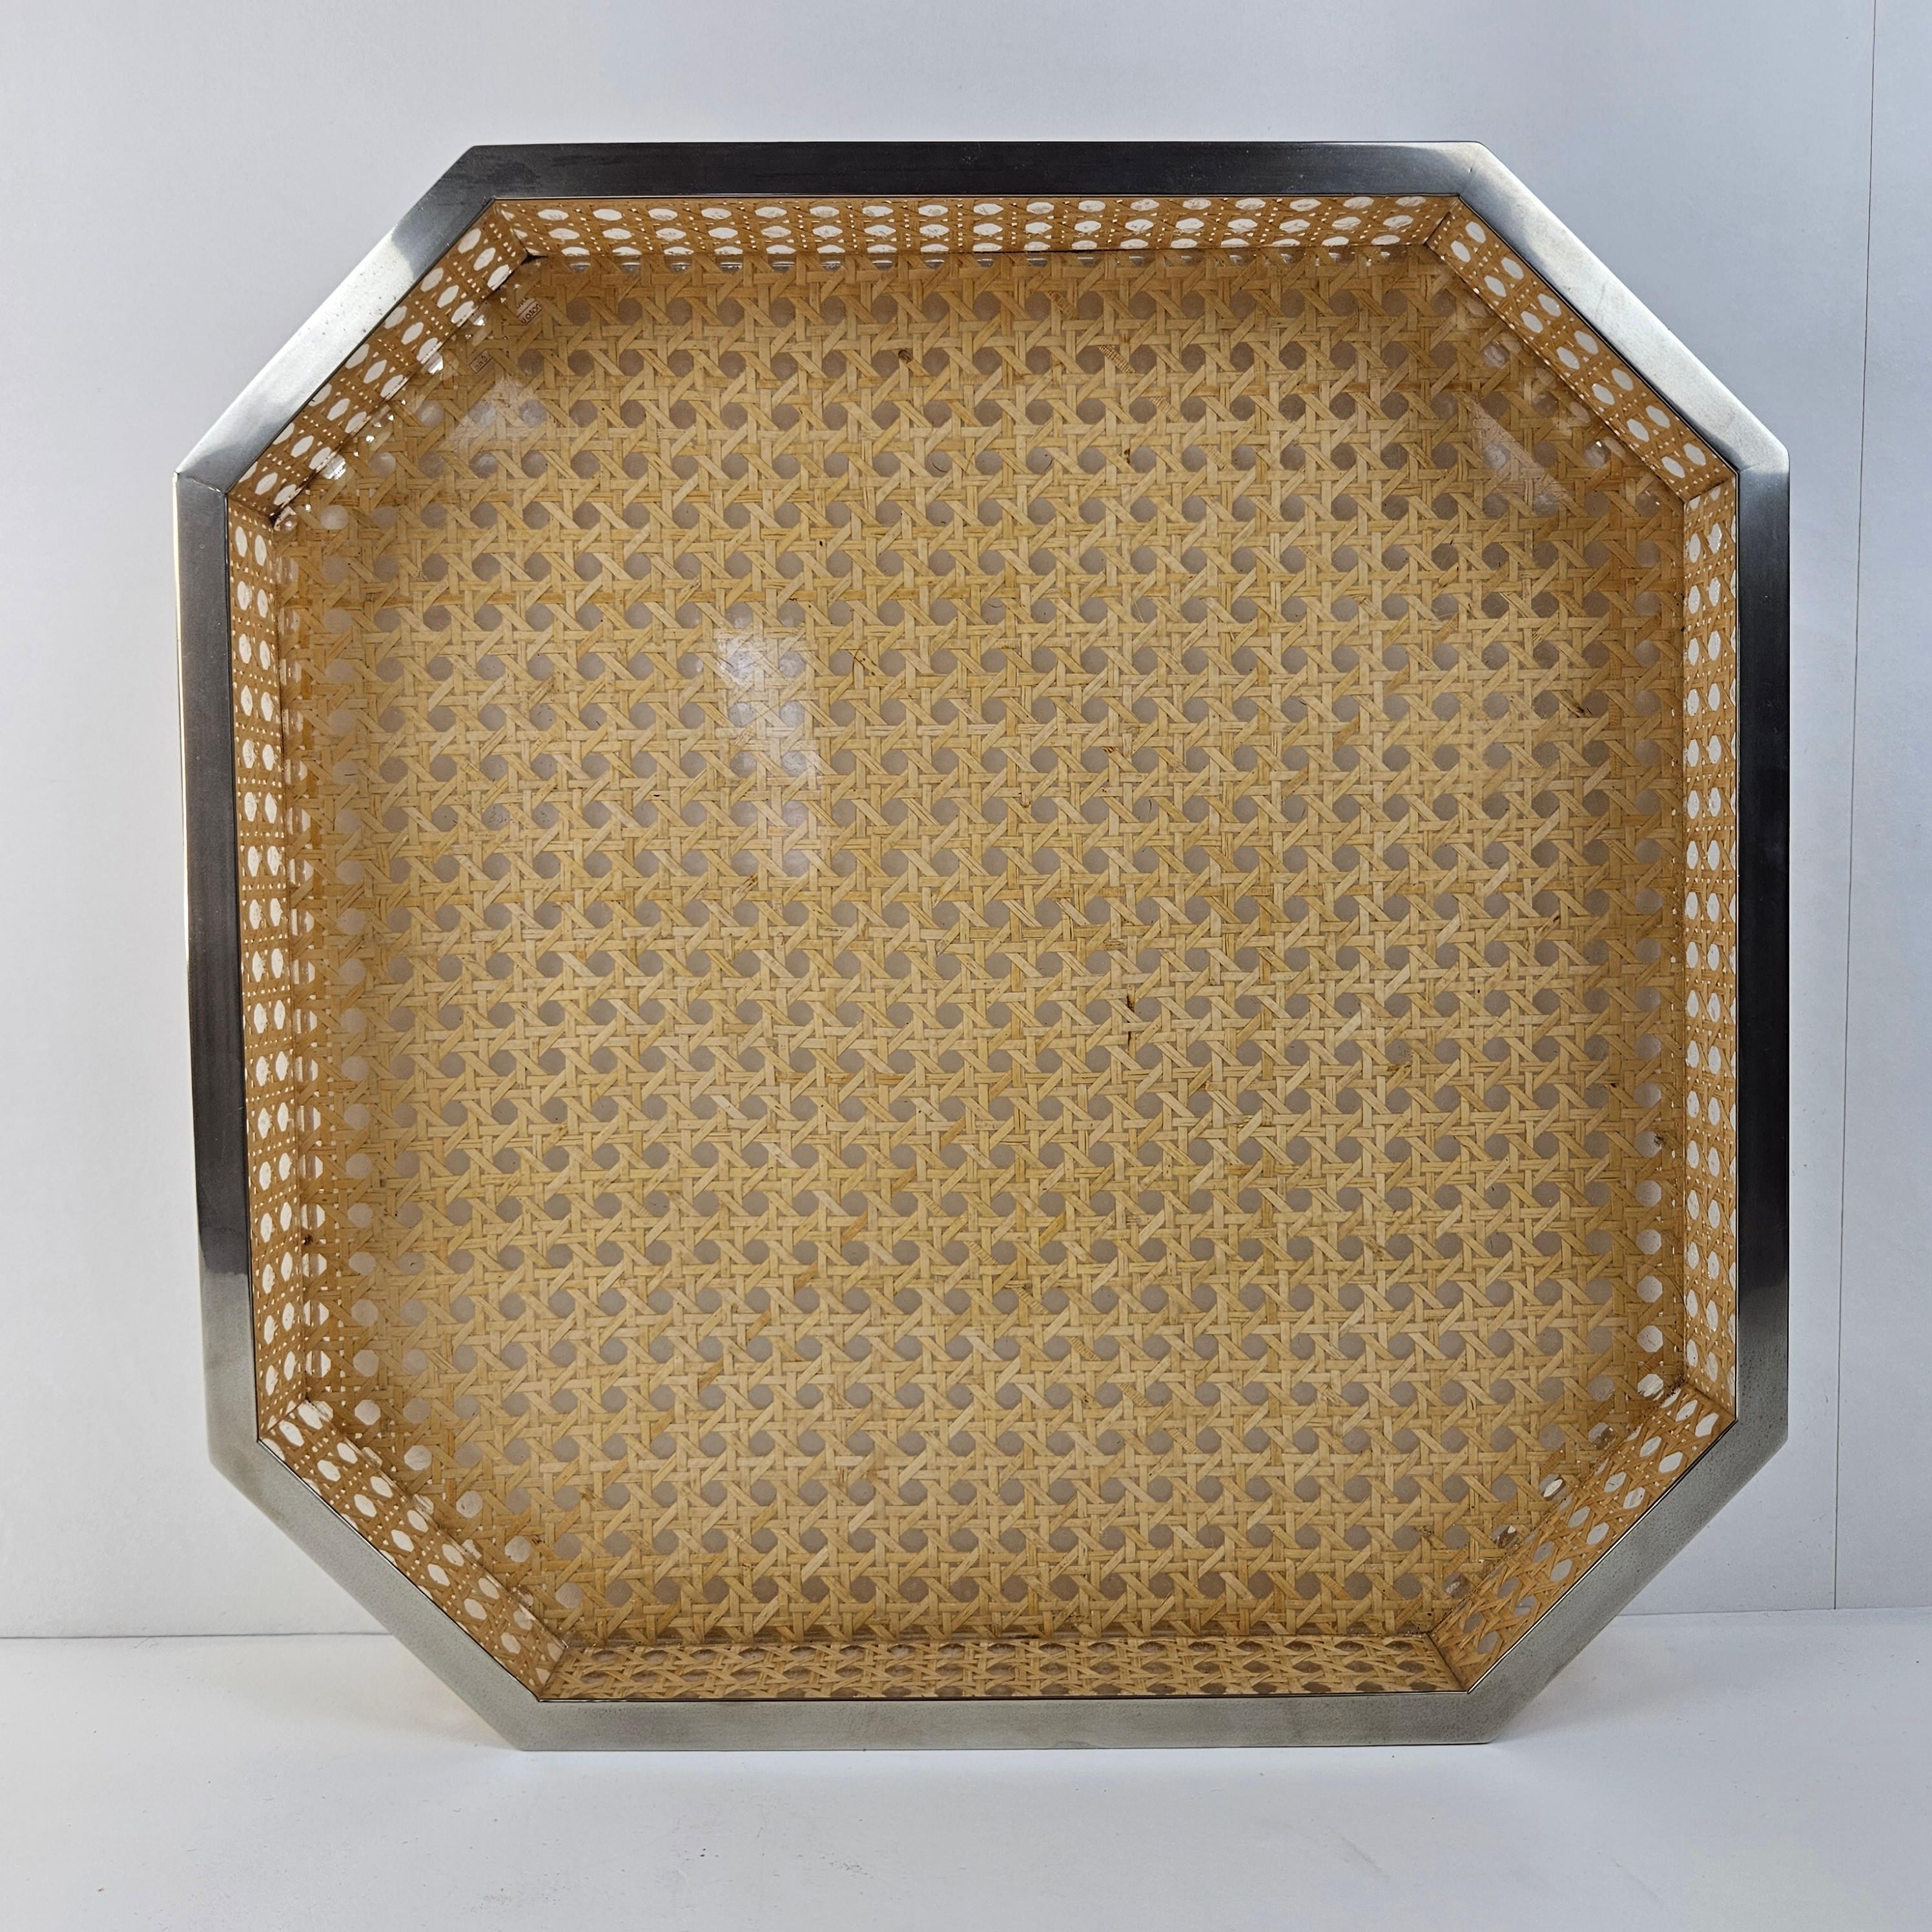 Wonderful Midcentury Italian octagonal serving tray.
This amazing piece is fabricated in Milan by Cavinato Ulderico & Co S.n.c. in the 70's.

It is made of lucite and wicker and finished with 24k gold (see the mark on the back).